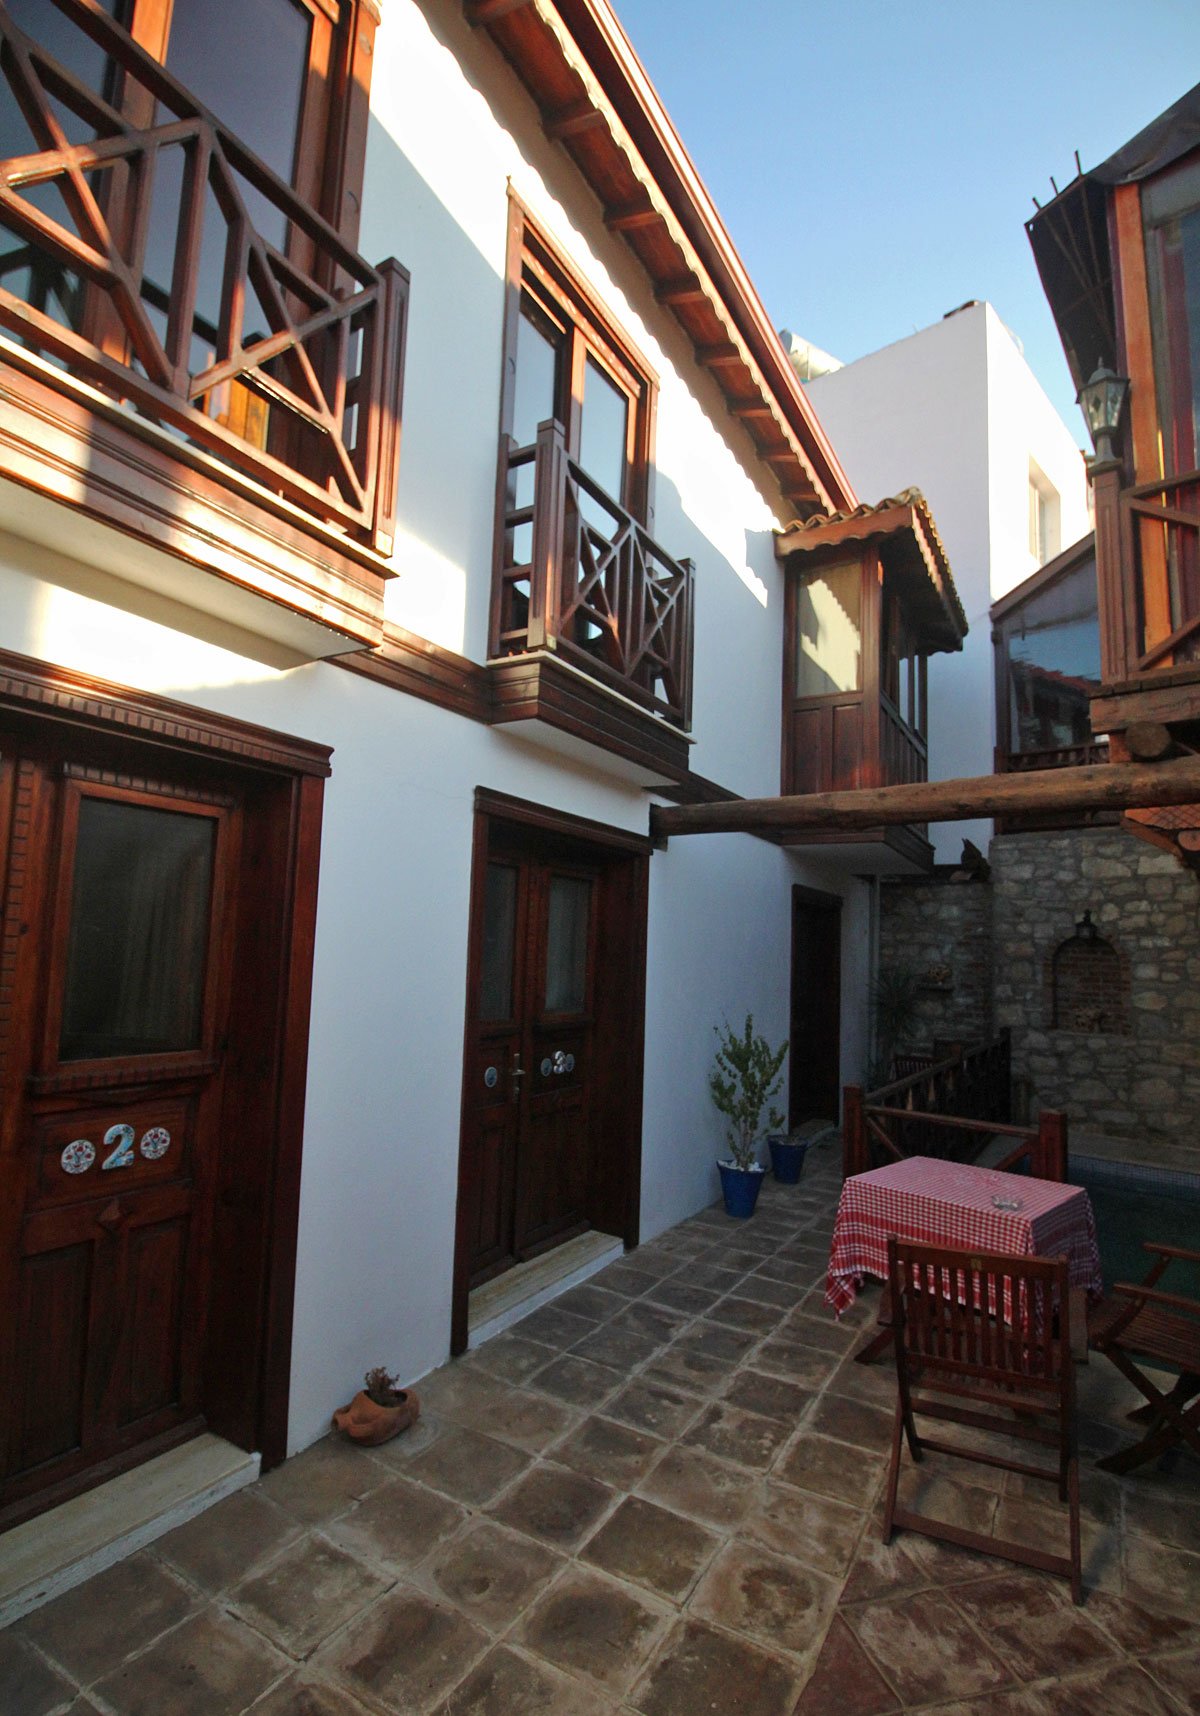 Amazon Petite Palace: Where to Stay in Selcuk, Turkey